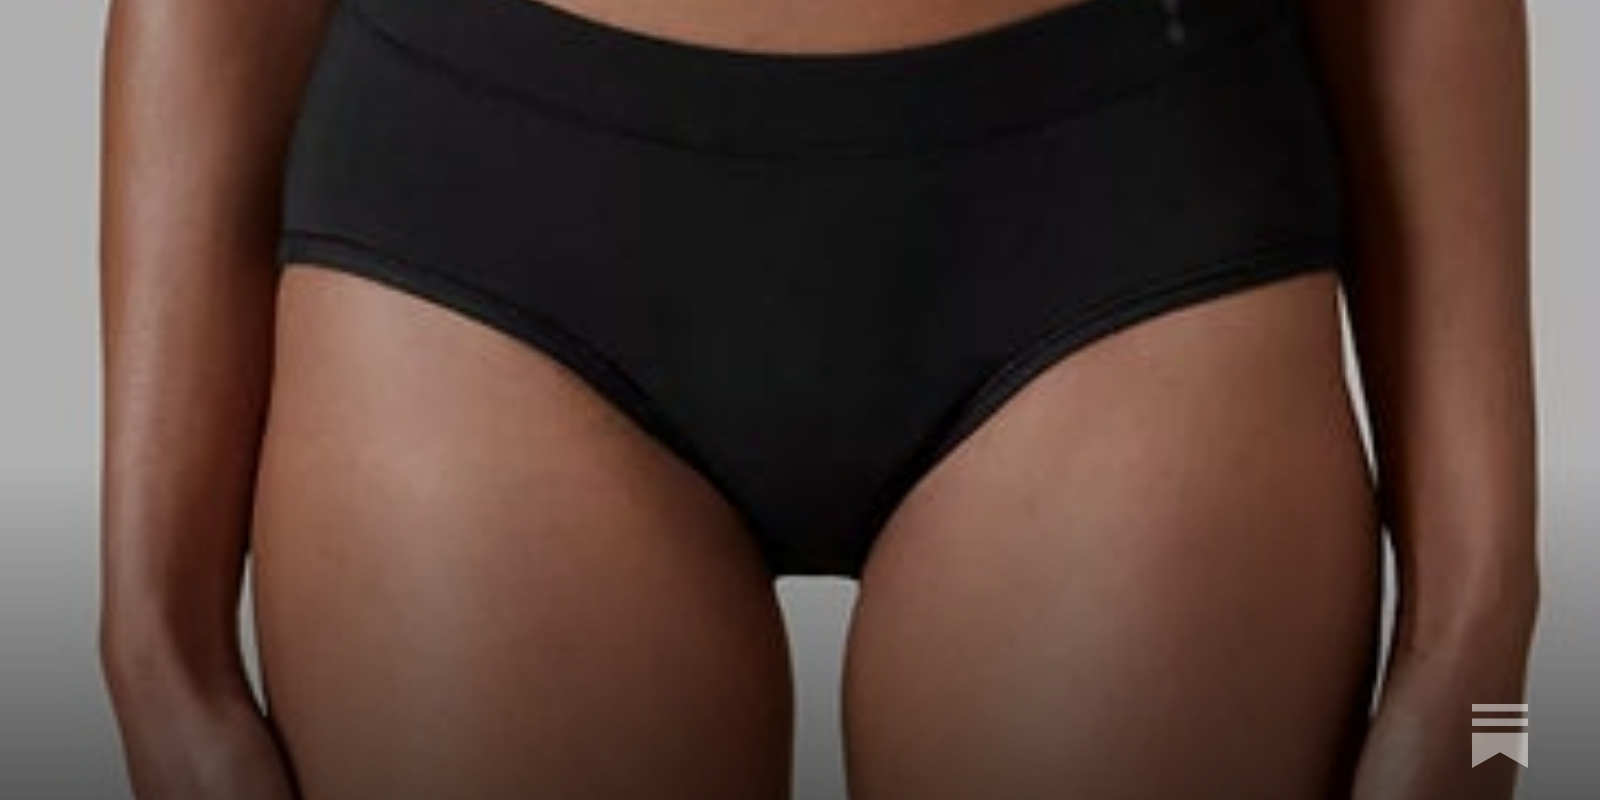 Thinx Period Panties Digs Hole Using Tainted Scientists to Deny Claims